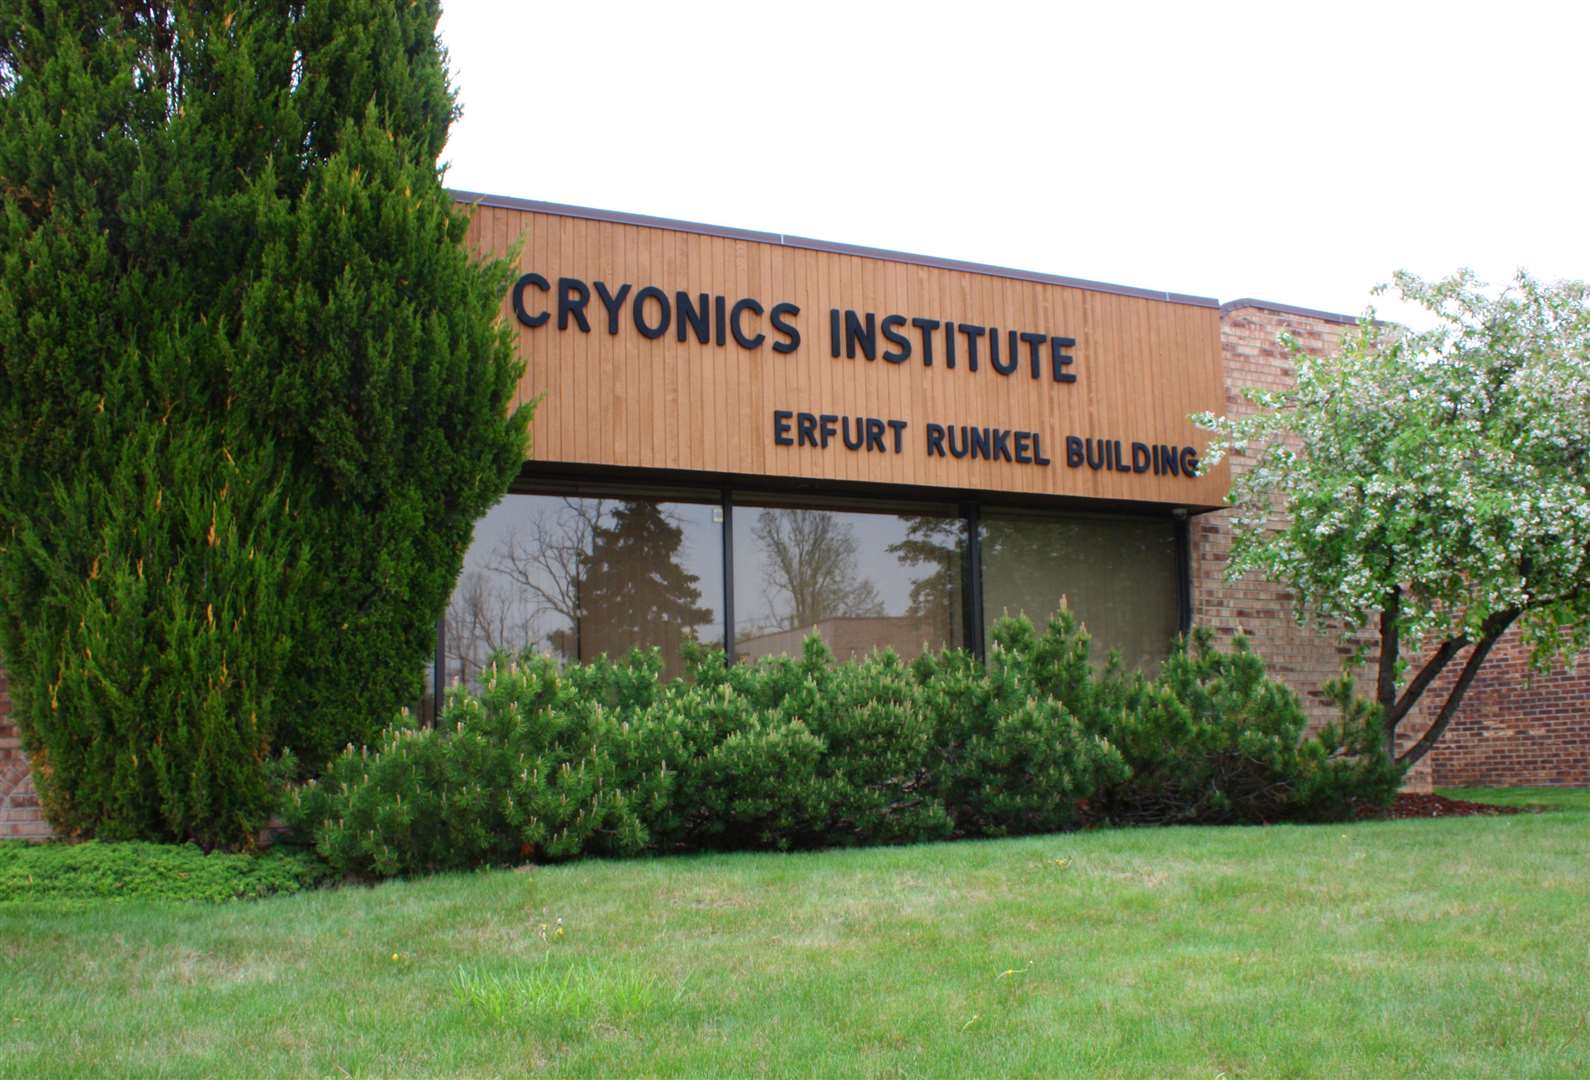 The Cryonics Institute in the US